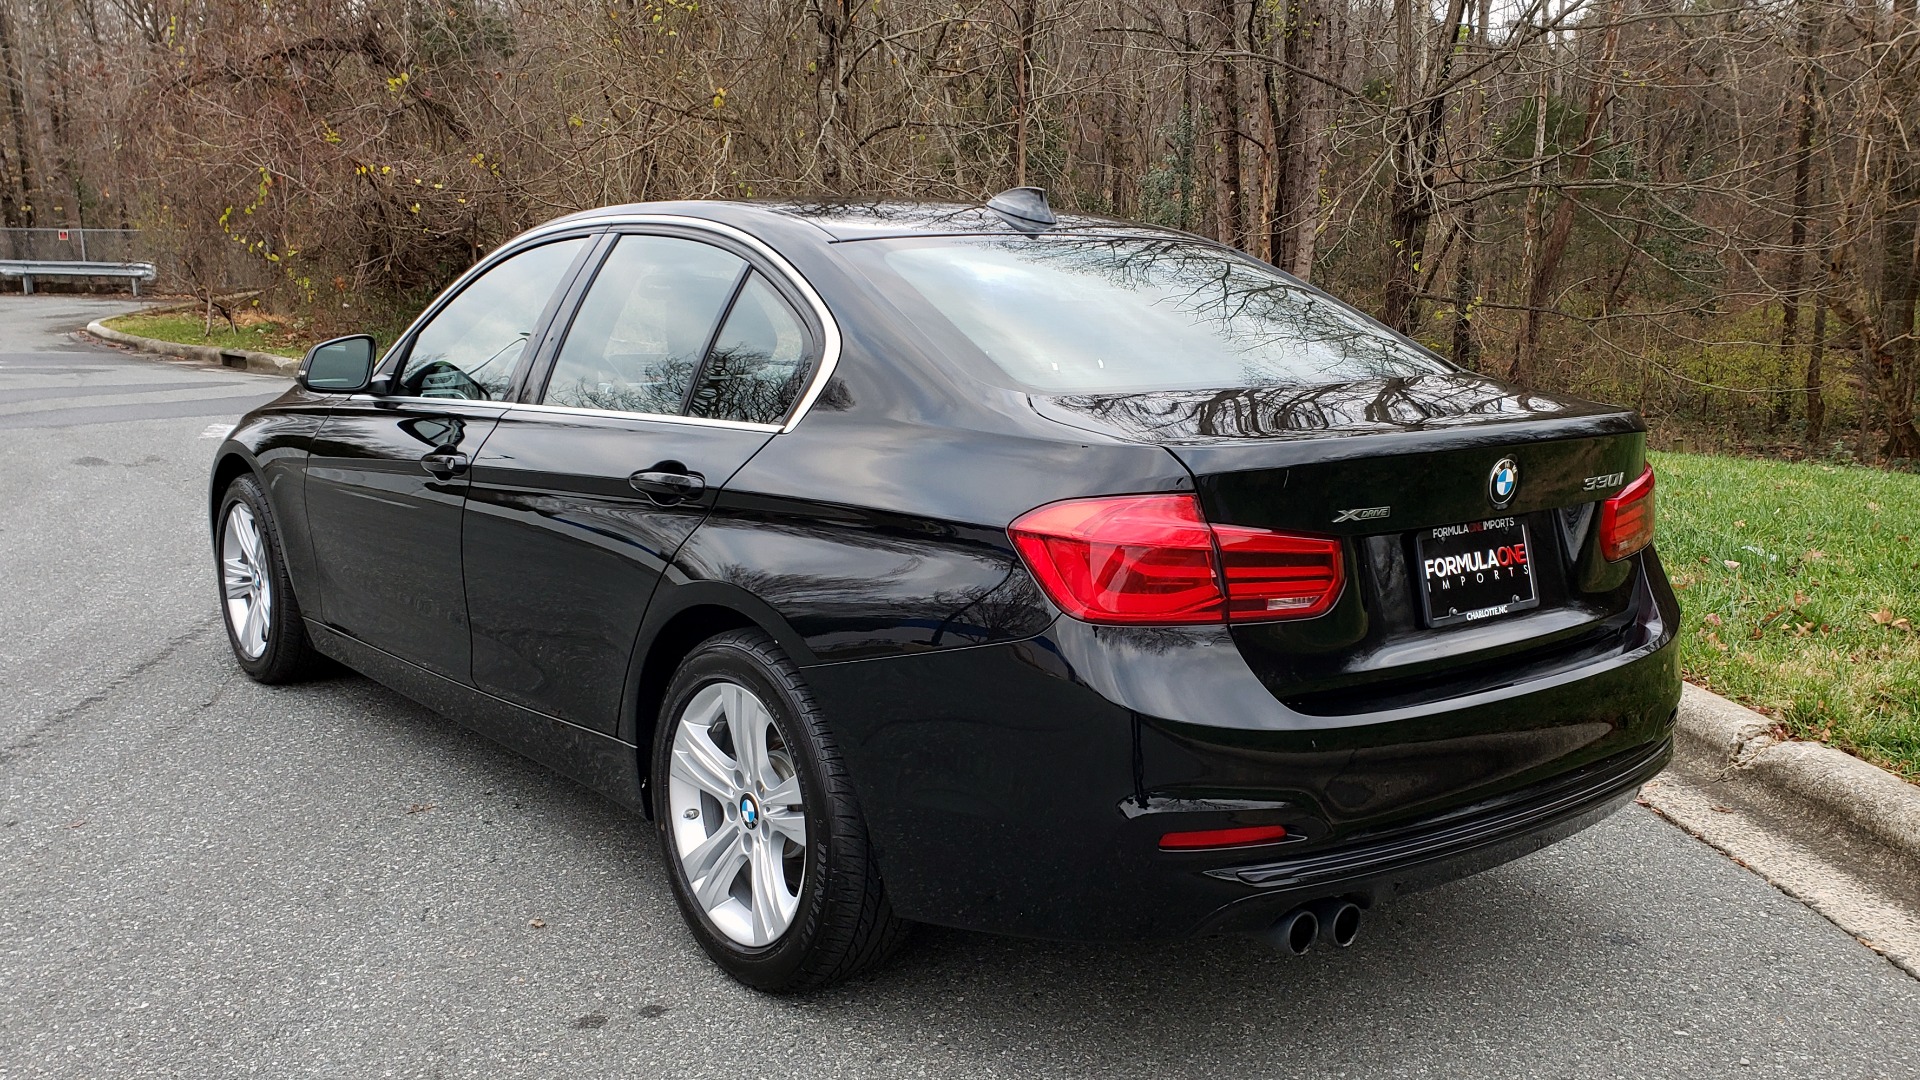 Used 2017 BMW 3 SERIES 330I XDRIVE / AWD / HEATED SEATS / LOW MILES for sale Sold at Formula Imports in Charlotte NC 28227 3